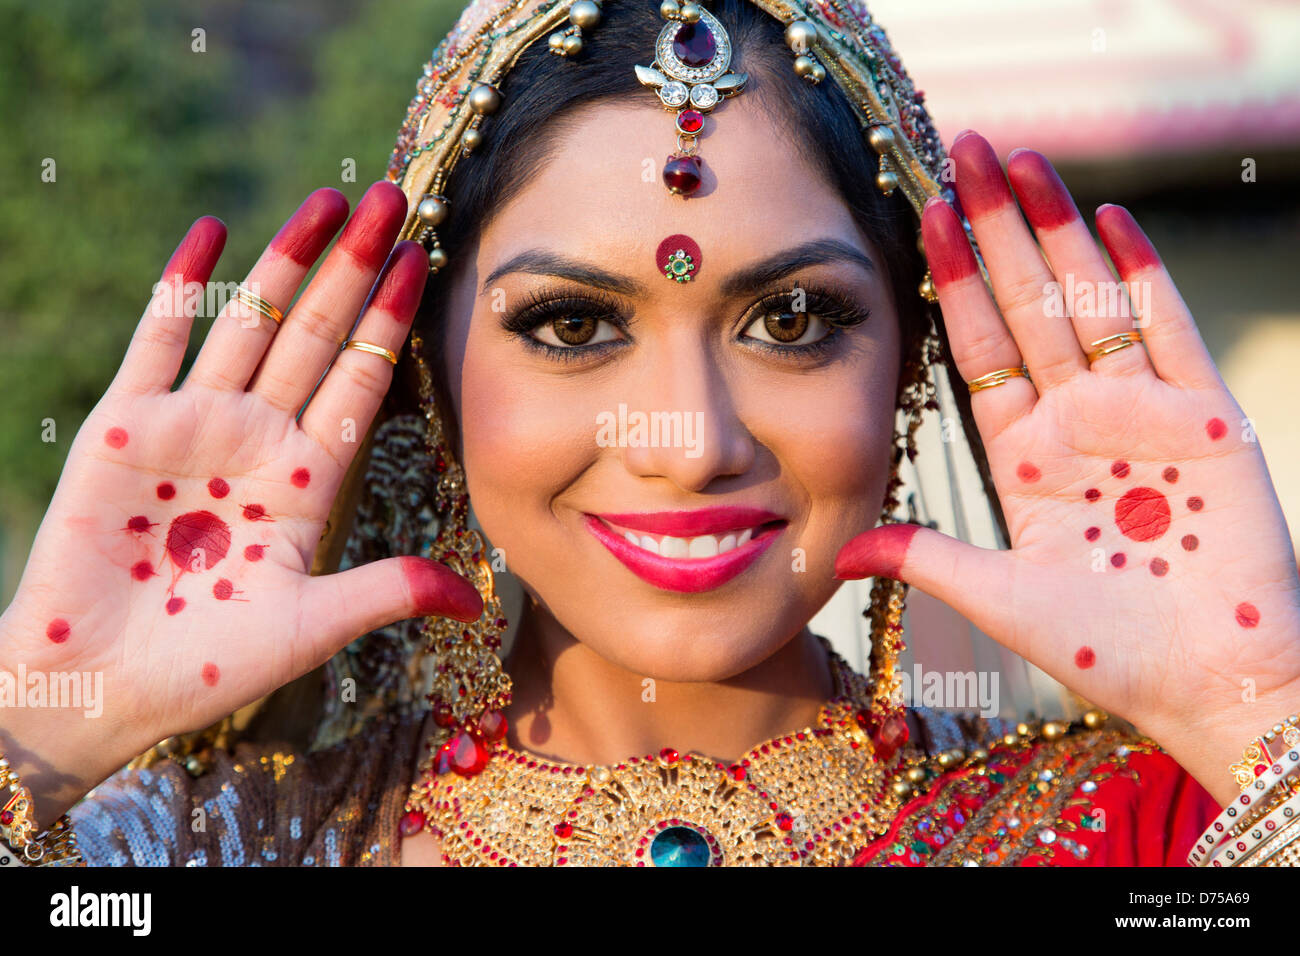 beautiful indian bride in traditional wedding dress and posing D75A69